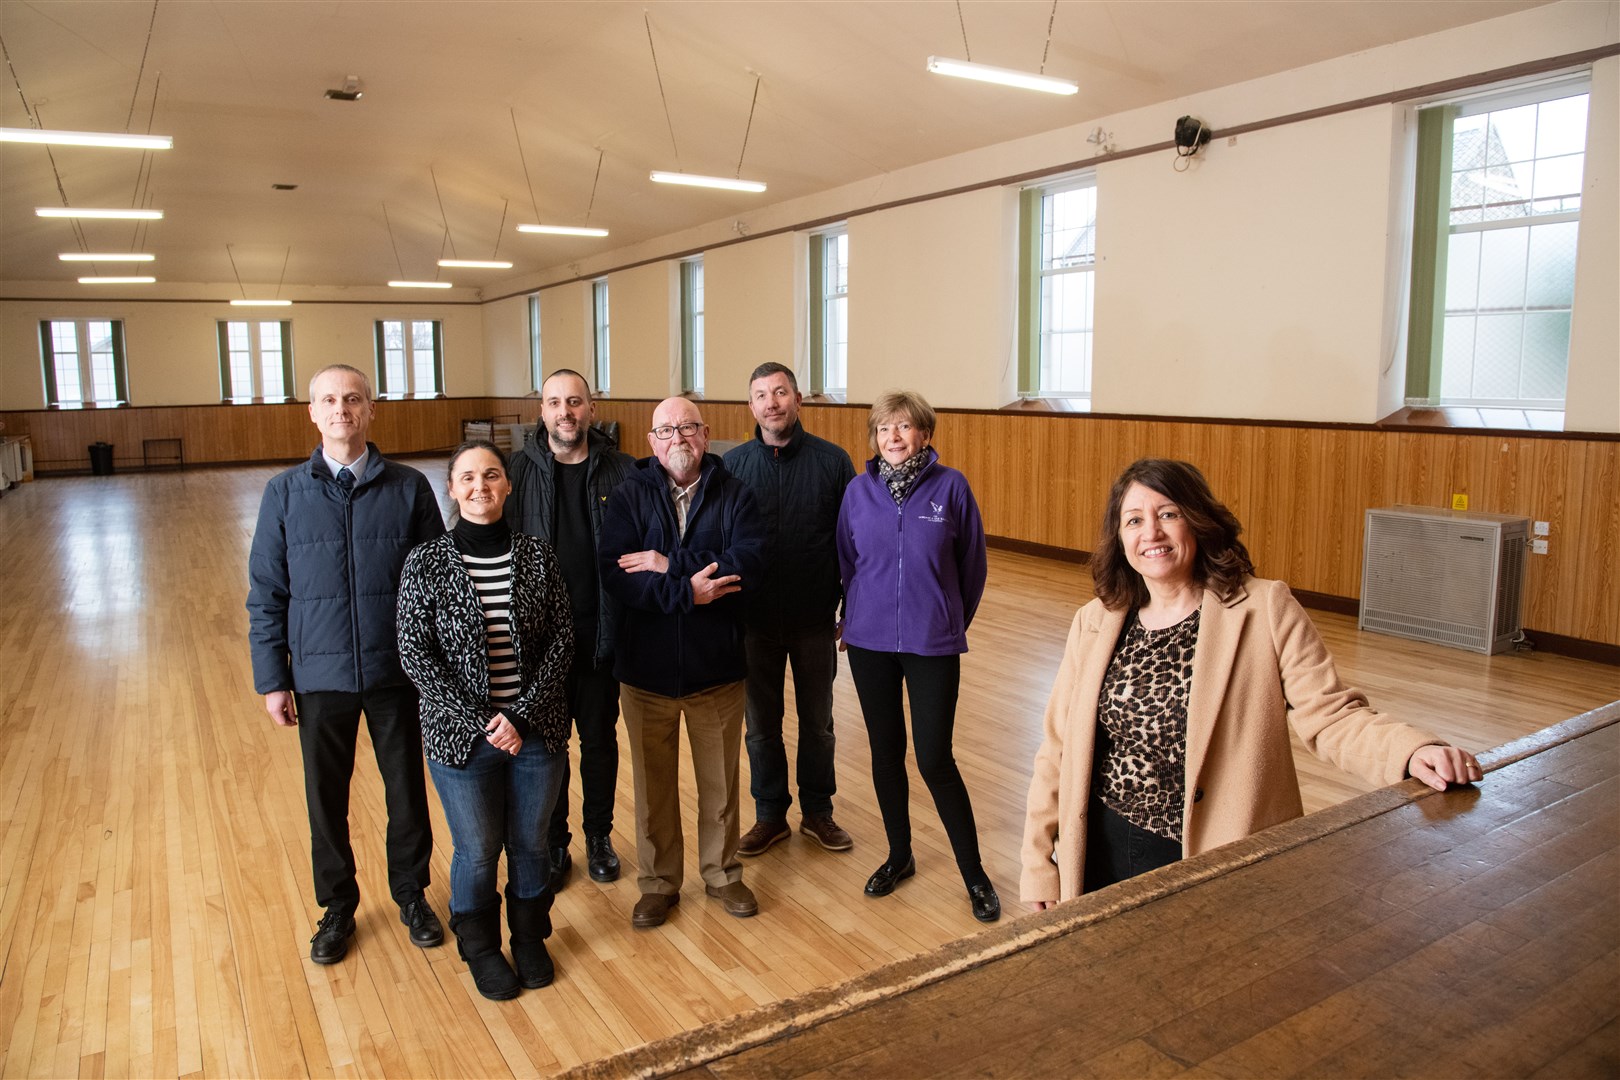 In the refurbished main hall, from left, Sandy Keith (Hall Trustee), Julie Lawrence (Bishopmill Mutual Improvement Association), Jérémie Fernandes (Local Councillor), Alex Gentleman (Bishopmill Mutual Improvement Association), Neil McAndrew (Moray Glass), Margaret Stenton (Gordon & Ena Baxter Foundation) and Lesley Williamson (Bishopmill Mutual Improvement Association). Picture: Daniel Forsyth